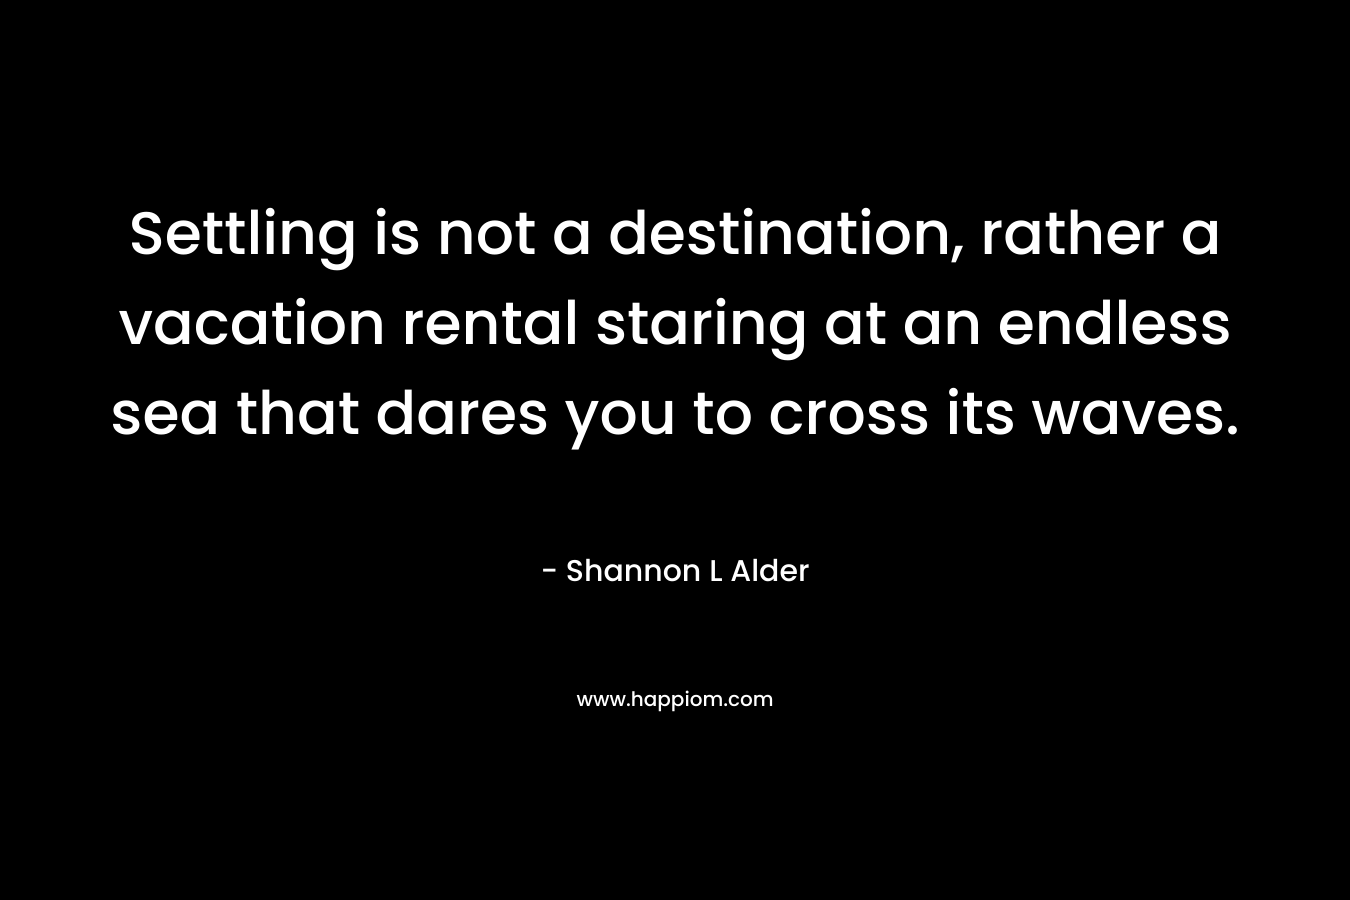 Settling is not a destination, rather a vacation rental staring at an endless sea that dares you to cross its waves. – Shannon L Alder